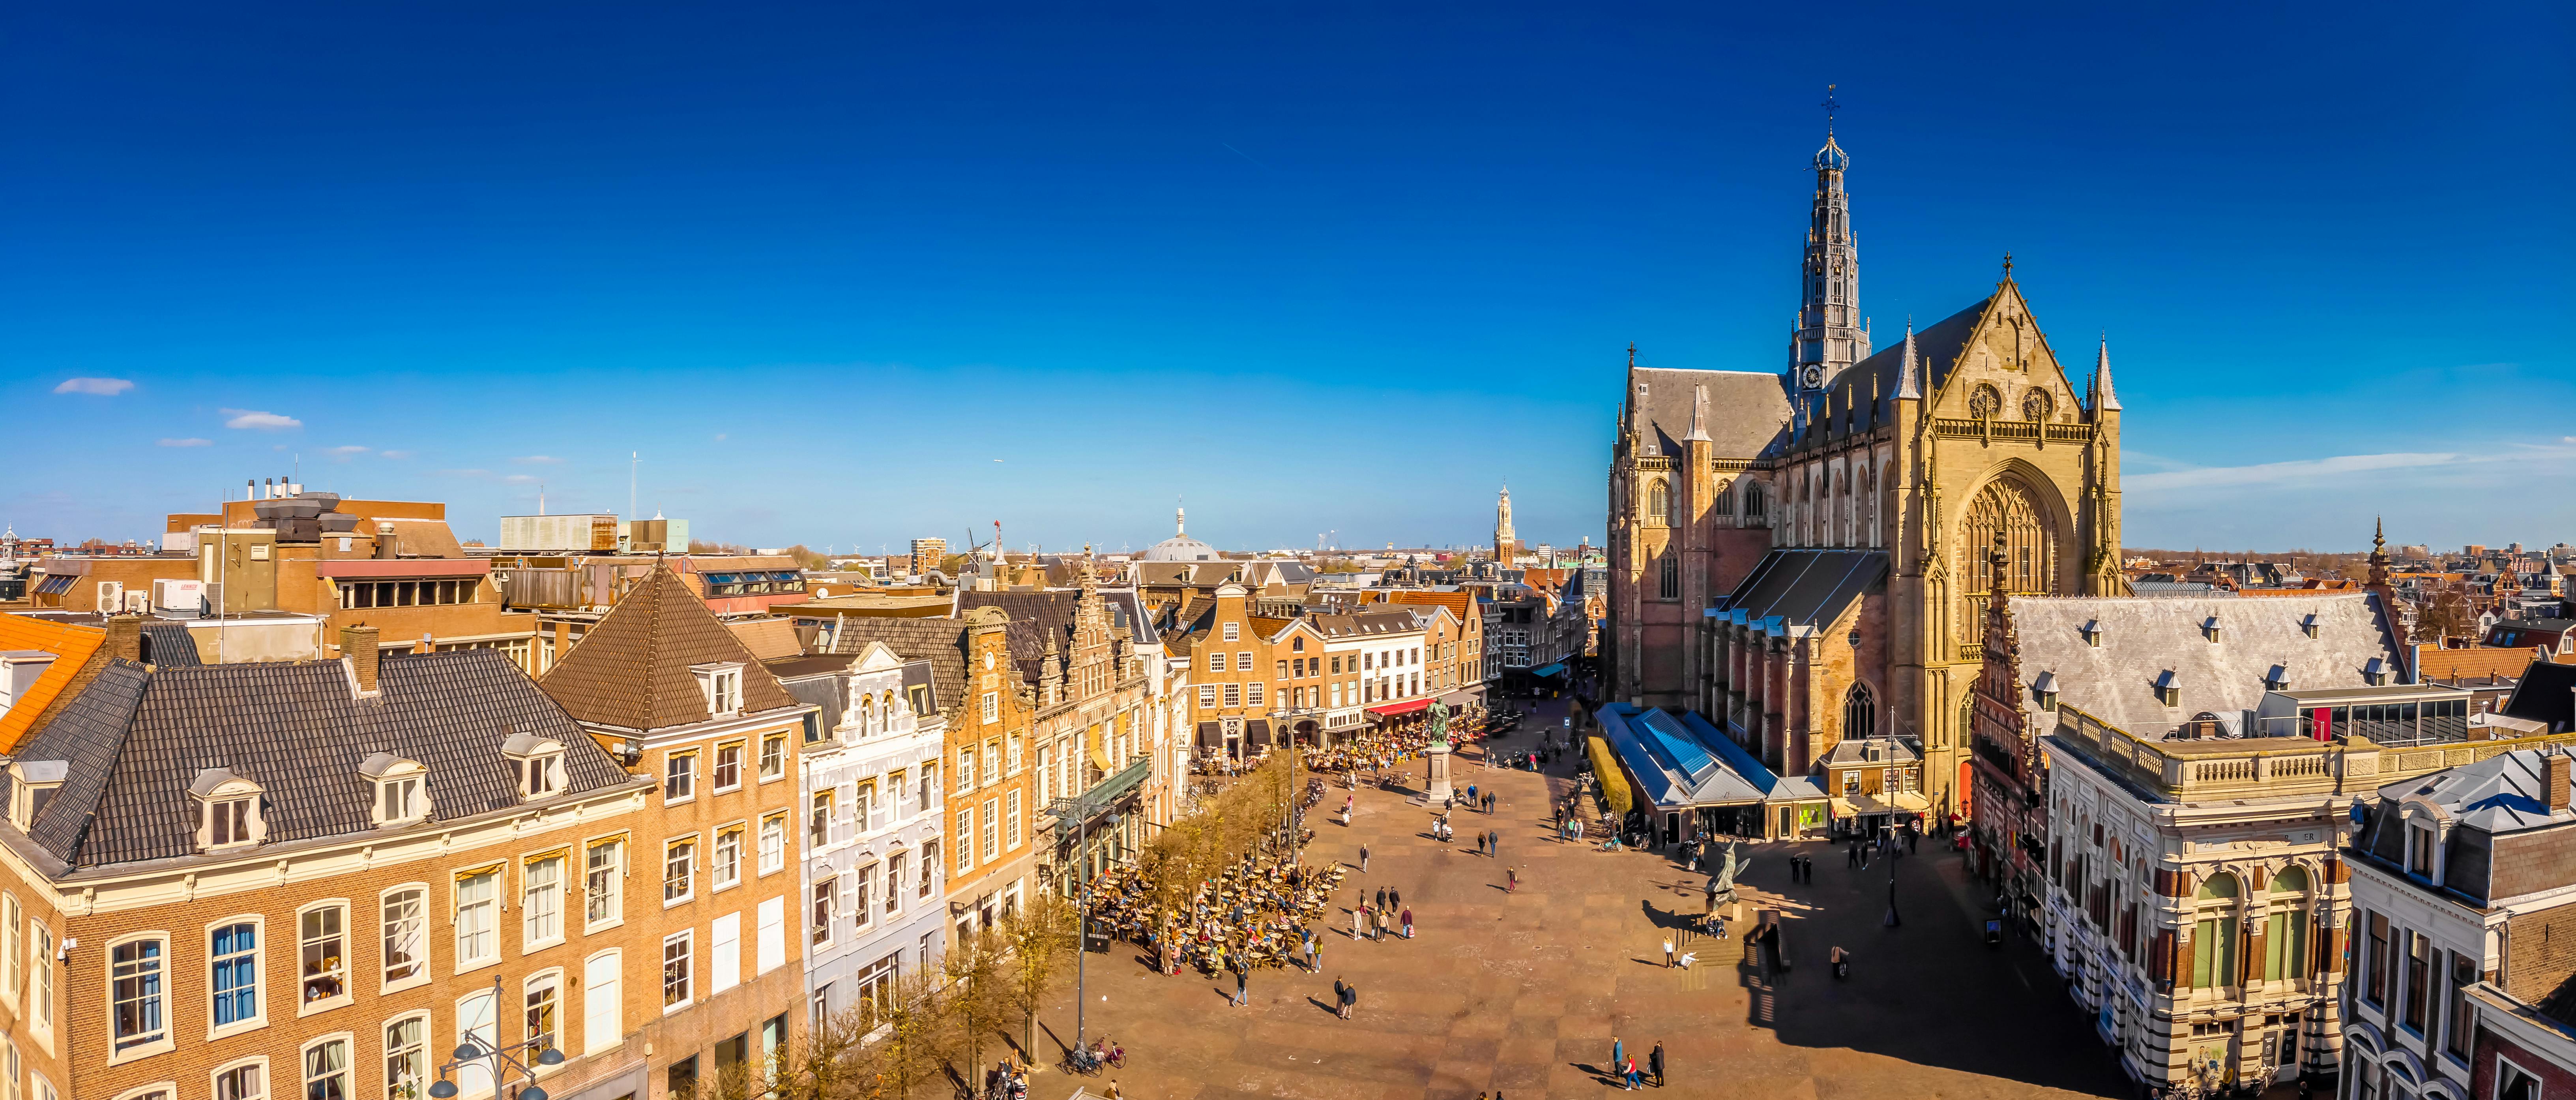 Self guided tour with interactive city game of Haarlem